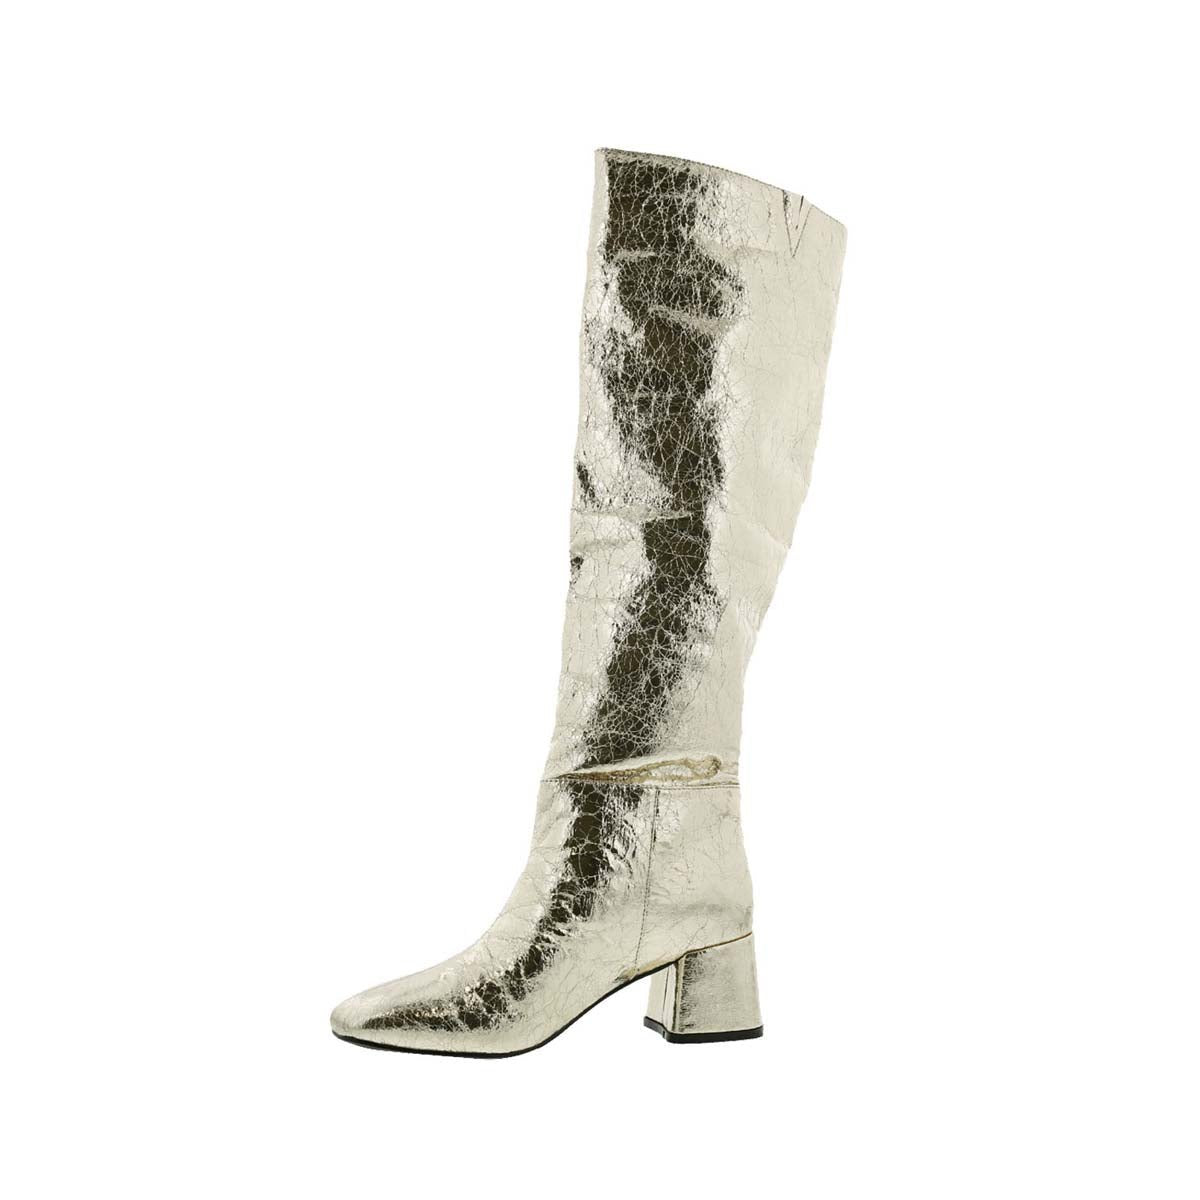 BELLINI REMI WOMEN KNEE HIGH BOOTS IN GOLD METALLIC CRINKLE - TLW Shoes